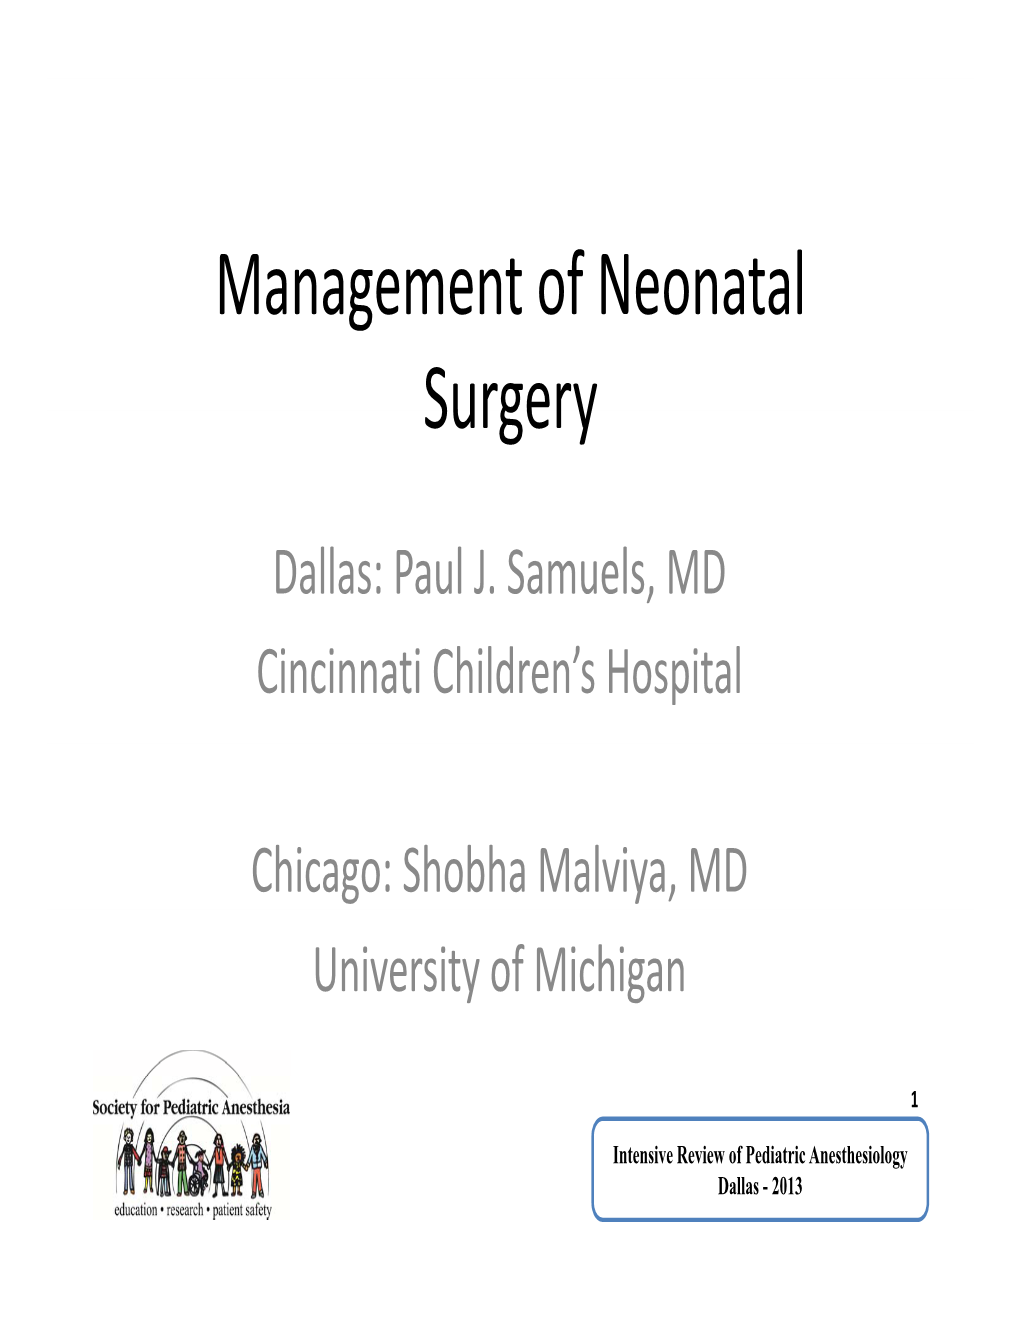 Management of Neonatal Surgery